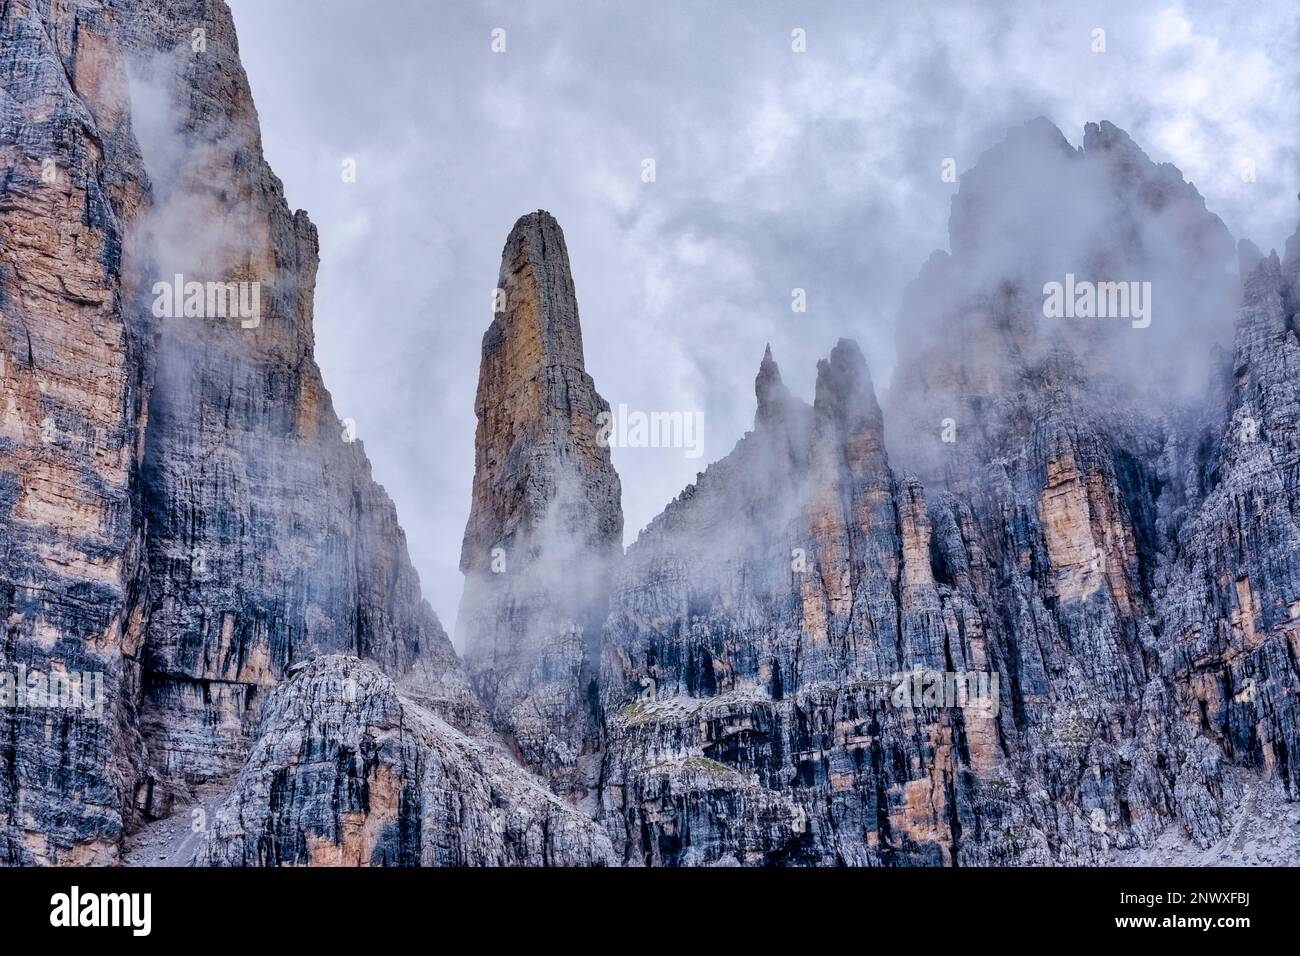 The summit of the rock needle Campanile Basso in Brenta Dolomites in the middle of surrounding rock cliffs, partially covered in clouds. Stock Photo